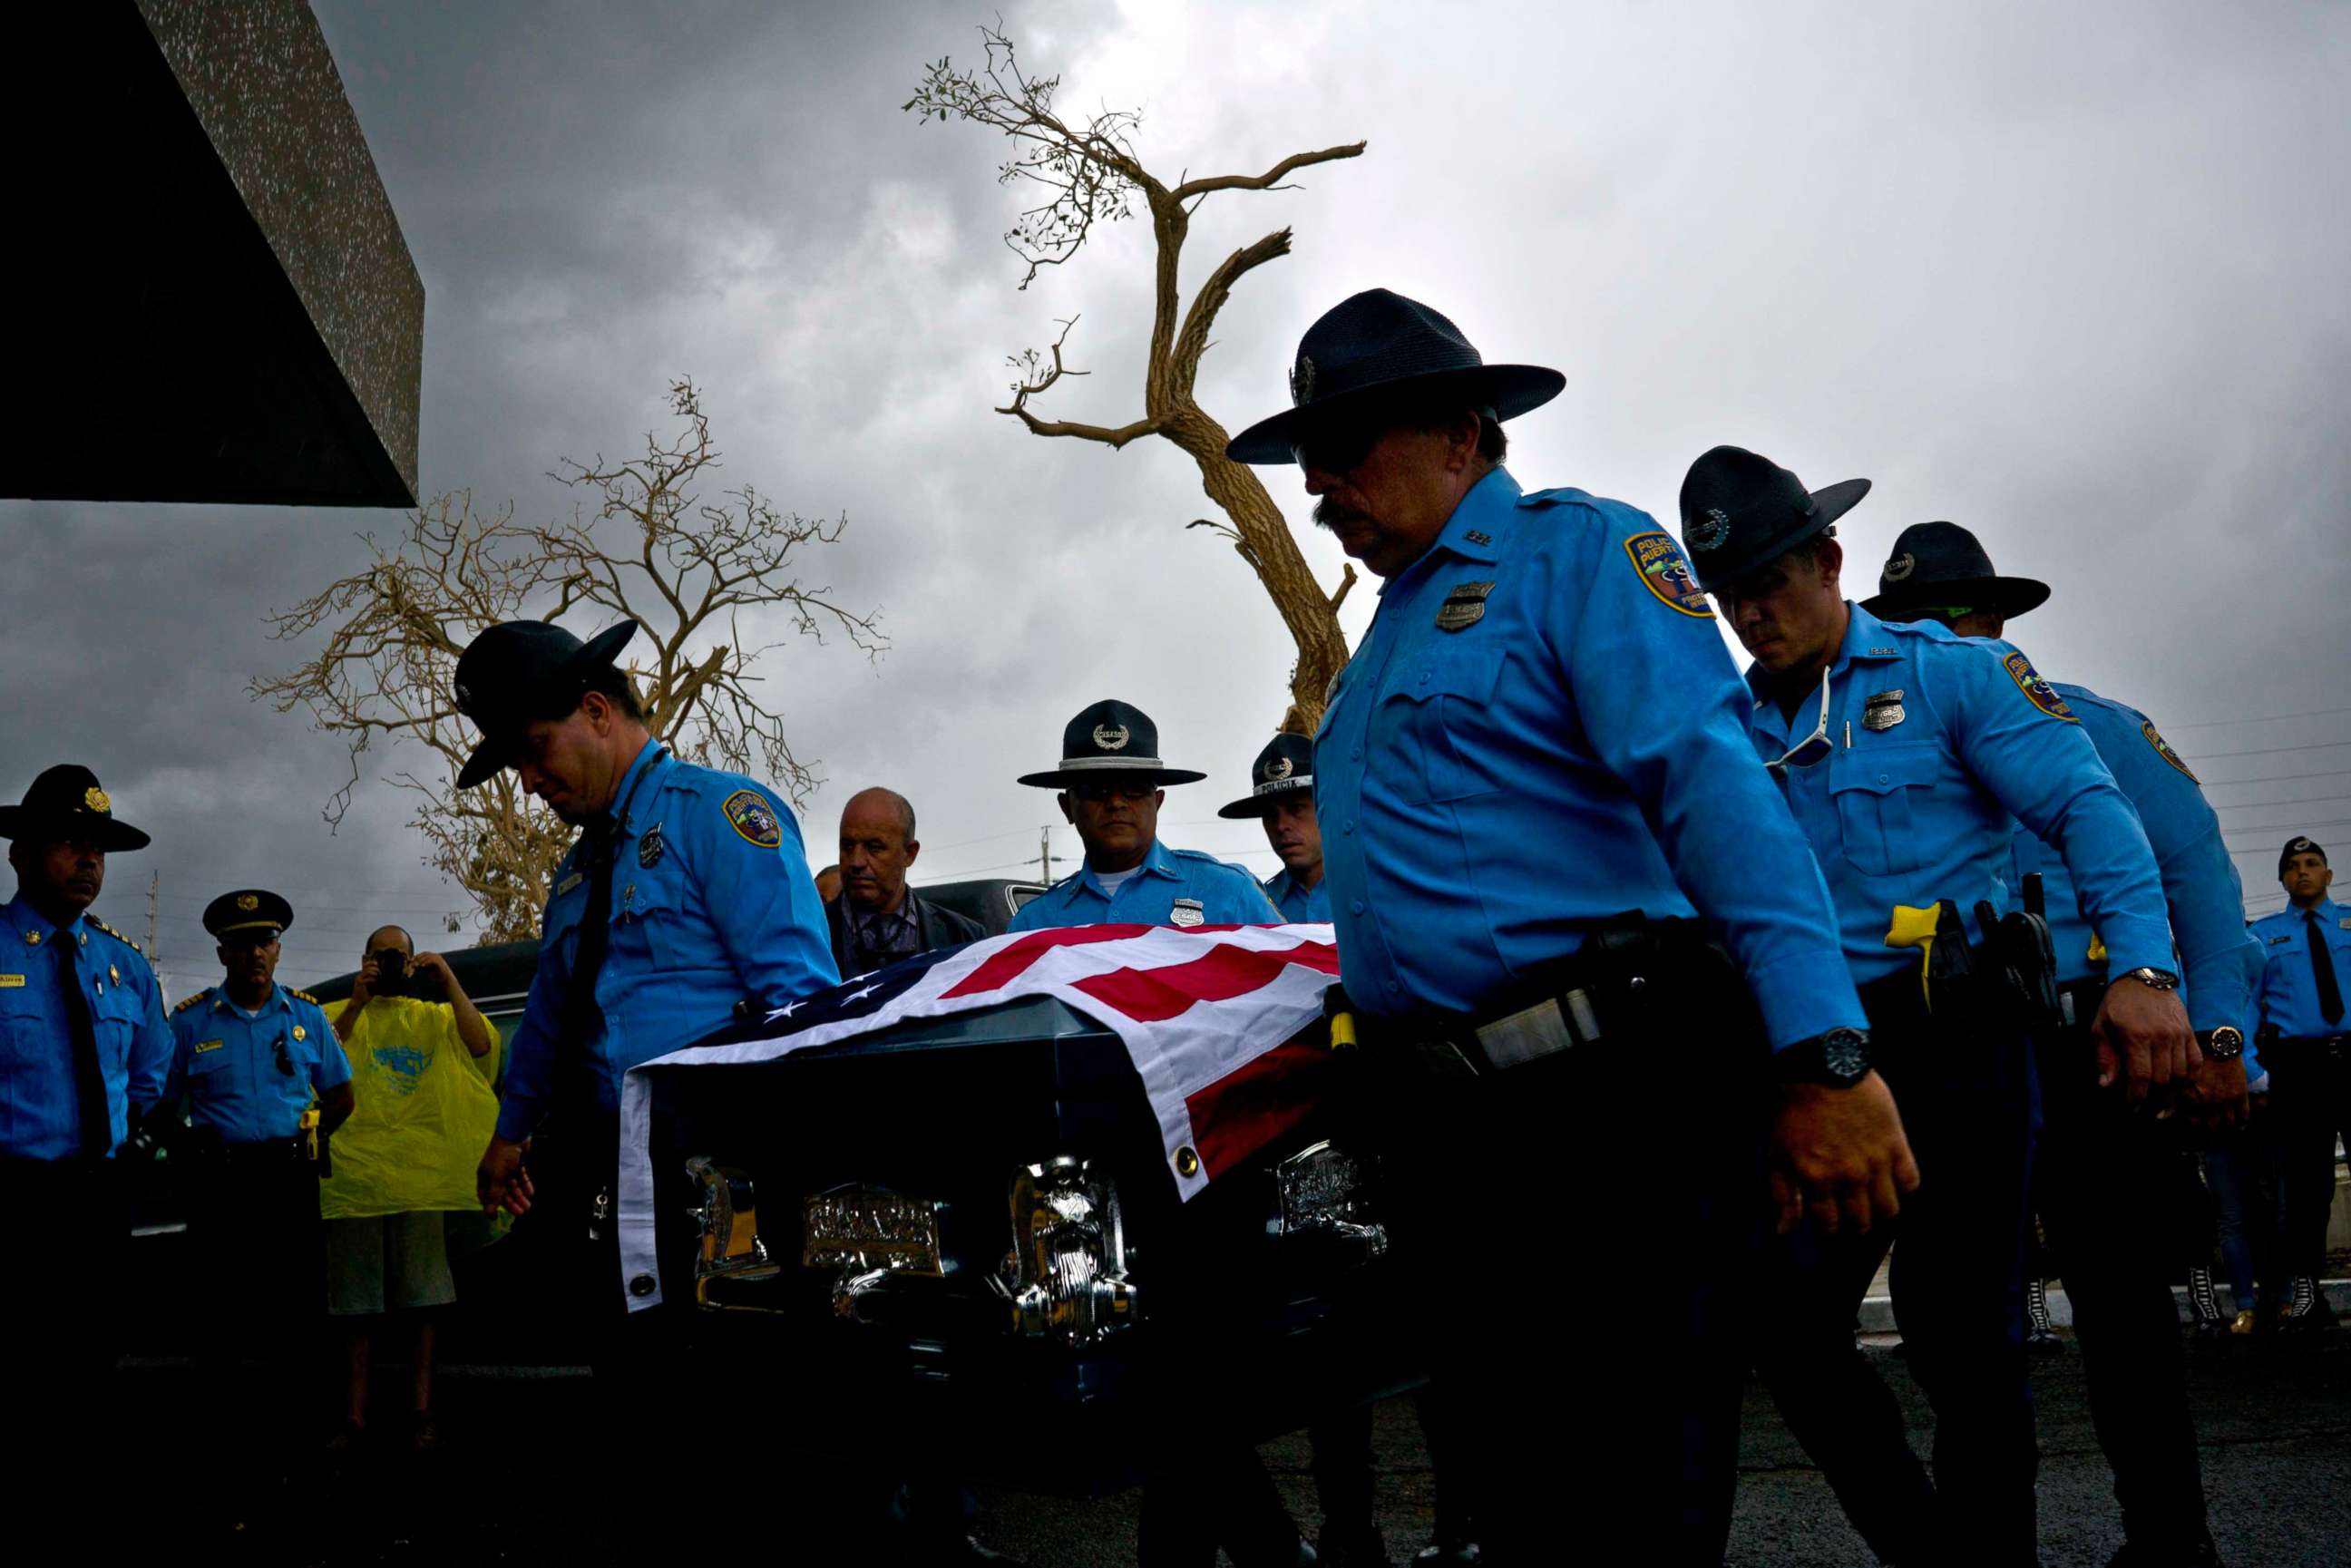 PHOTO: Honor guards carry the coffin of policeman Luis Angel Gonzalez Lorenzo, killed during Hurricane Maria when he tried to cross a river by car, during his funeral at the cemetery in Aguada, Puerto Rico, Sept. 29, 2017.